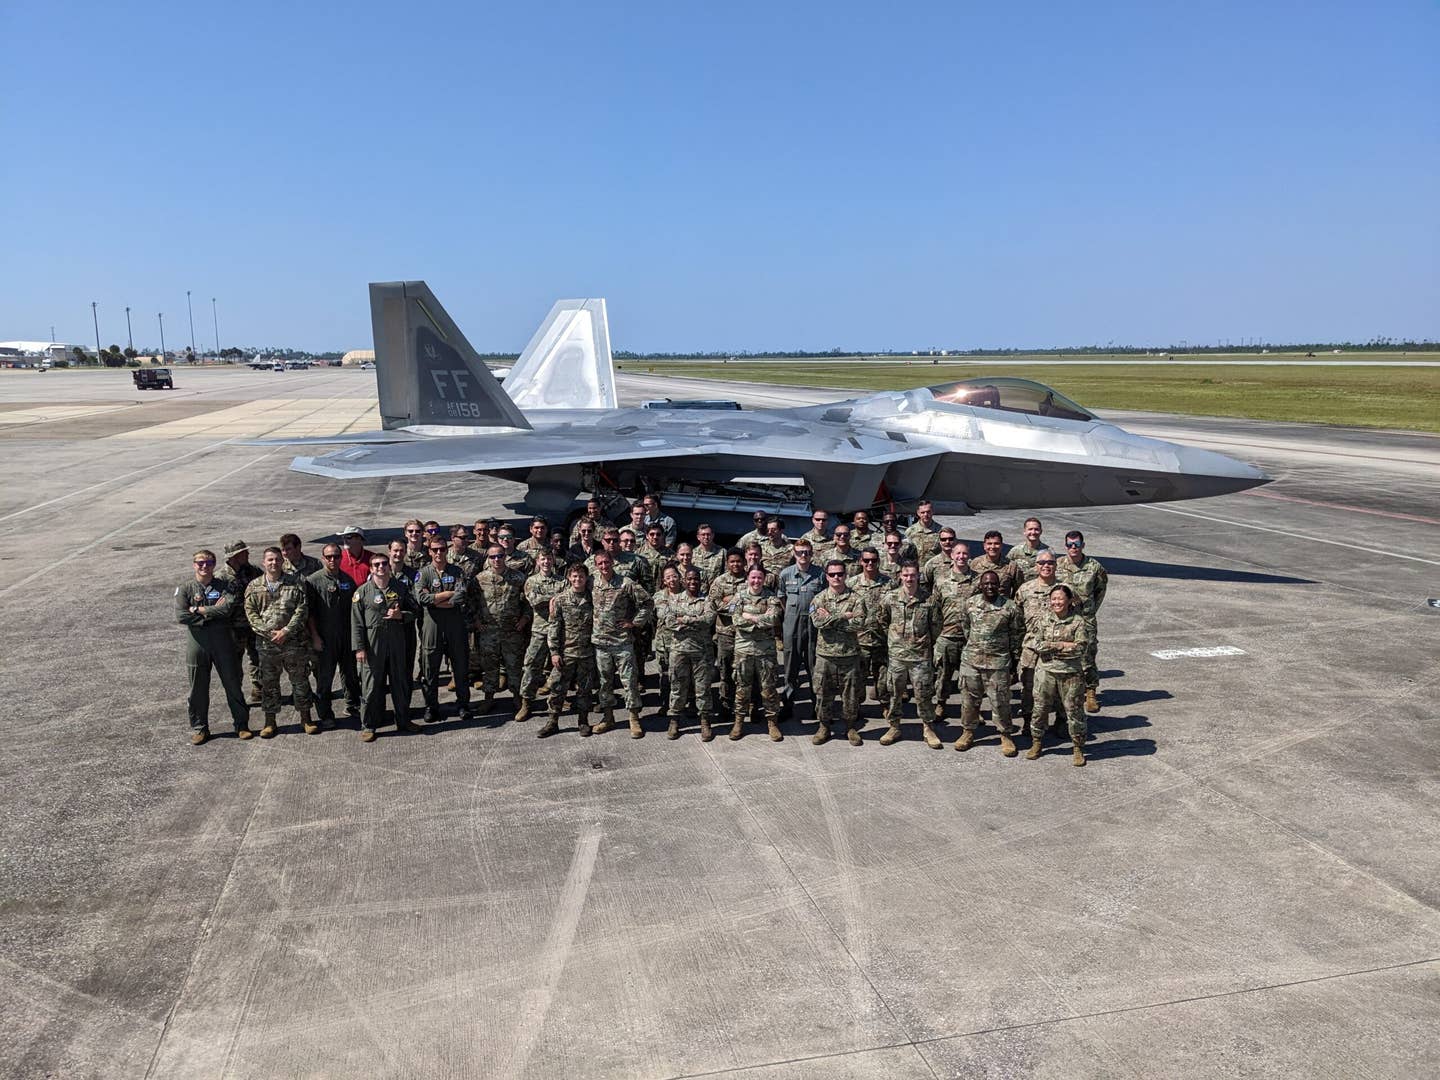 Members from the 94th Fighter Squadron and 94th Fighter Generation Squadron pose for a photo during Weapons System Evaluation Program 22.12 at Tyndall Air Force Base, Florida, in September 2022. The units employed 28 air-to-air missiles, breaking the record for the most AAMs loaded and successfully fired by F-22s. <em>U.S. Air Force</em>